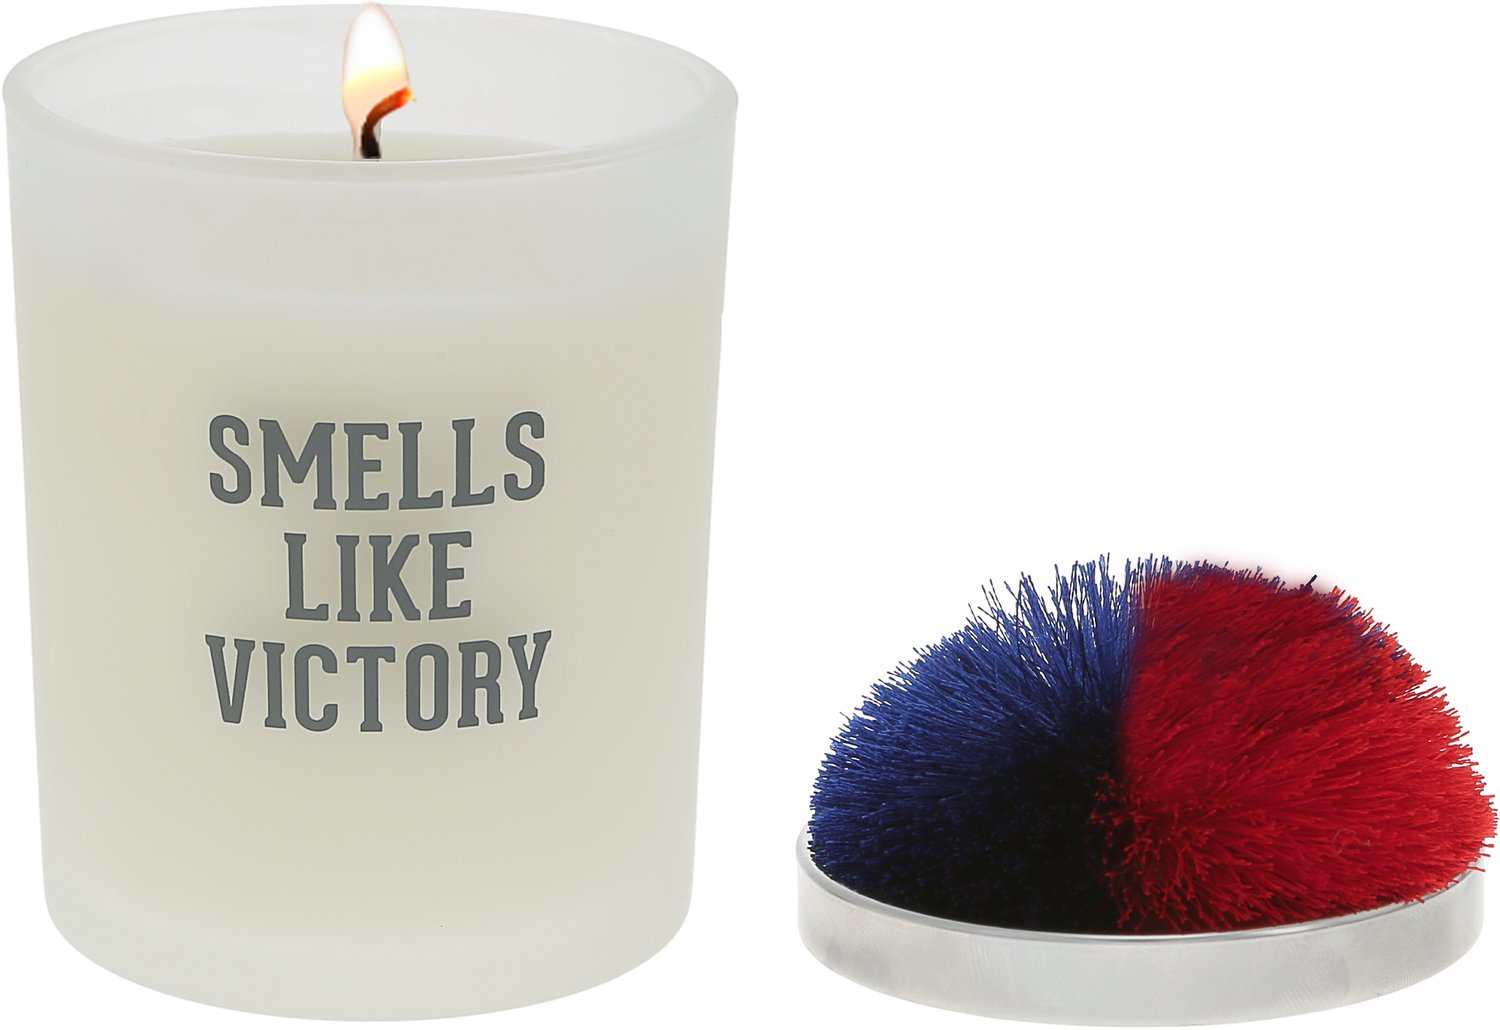 Victory - Red & Blue by Repre-Scent - Victory - Red & Blue - 5.5 oz - 100% Soy Wax Candle with Pom Pom Lid
Scent: Tranquility